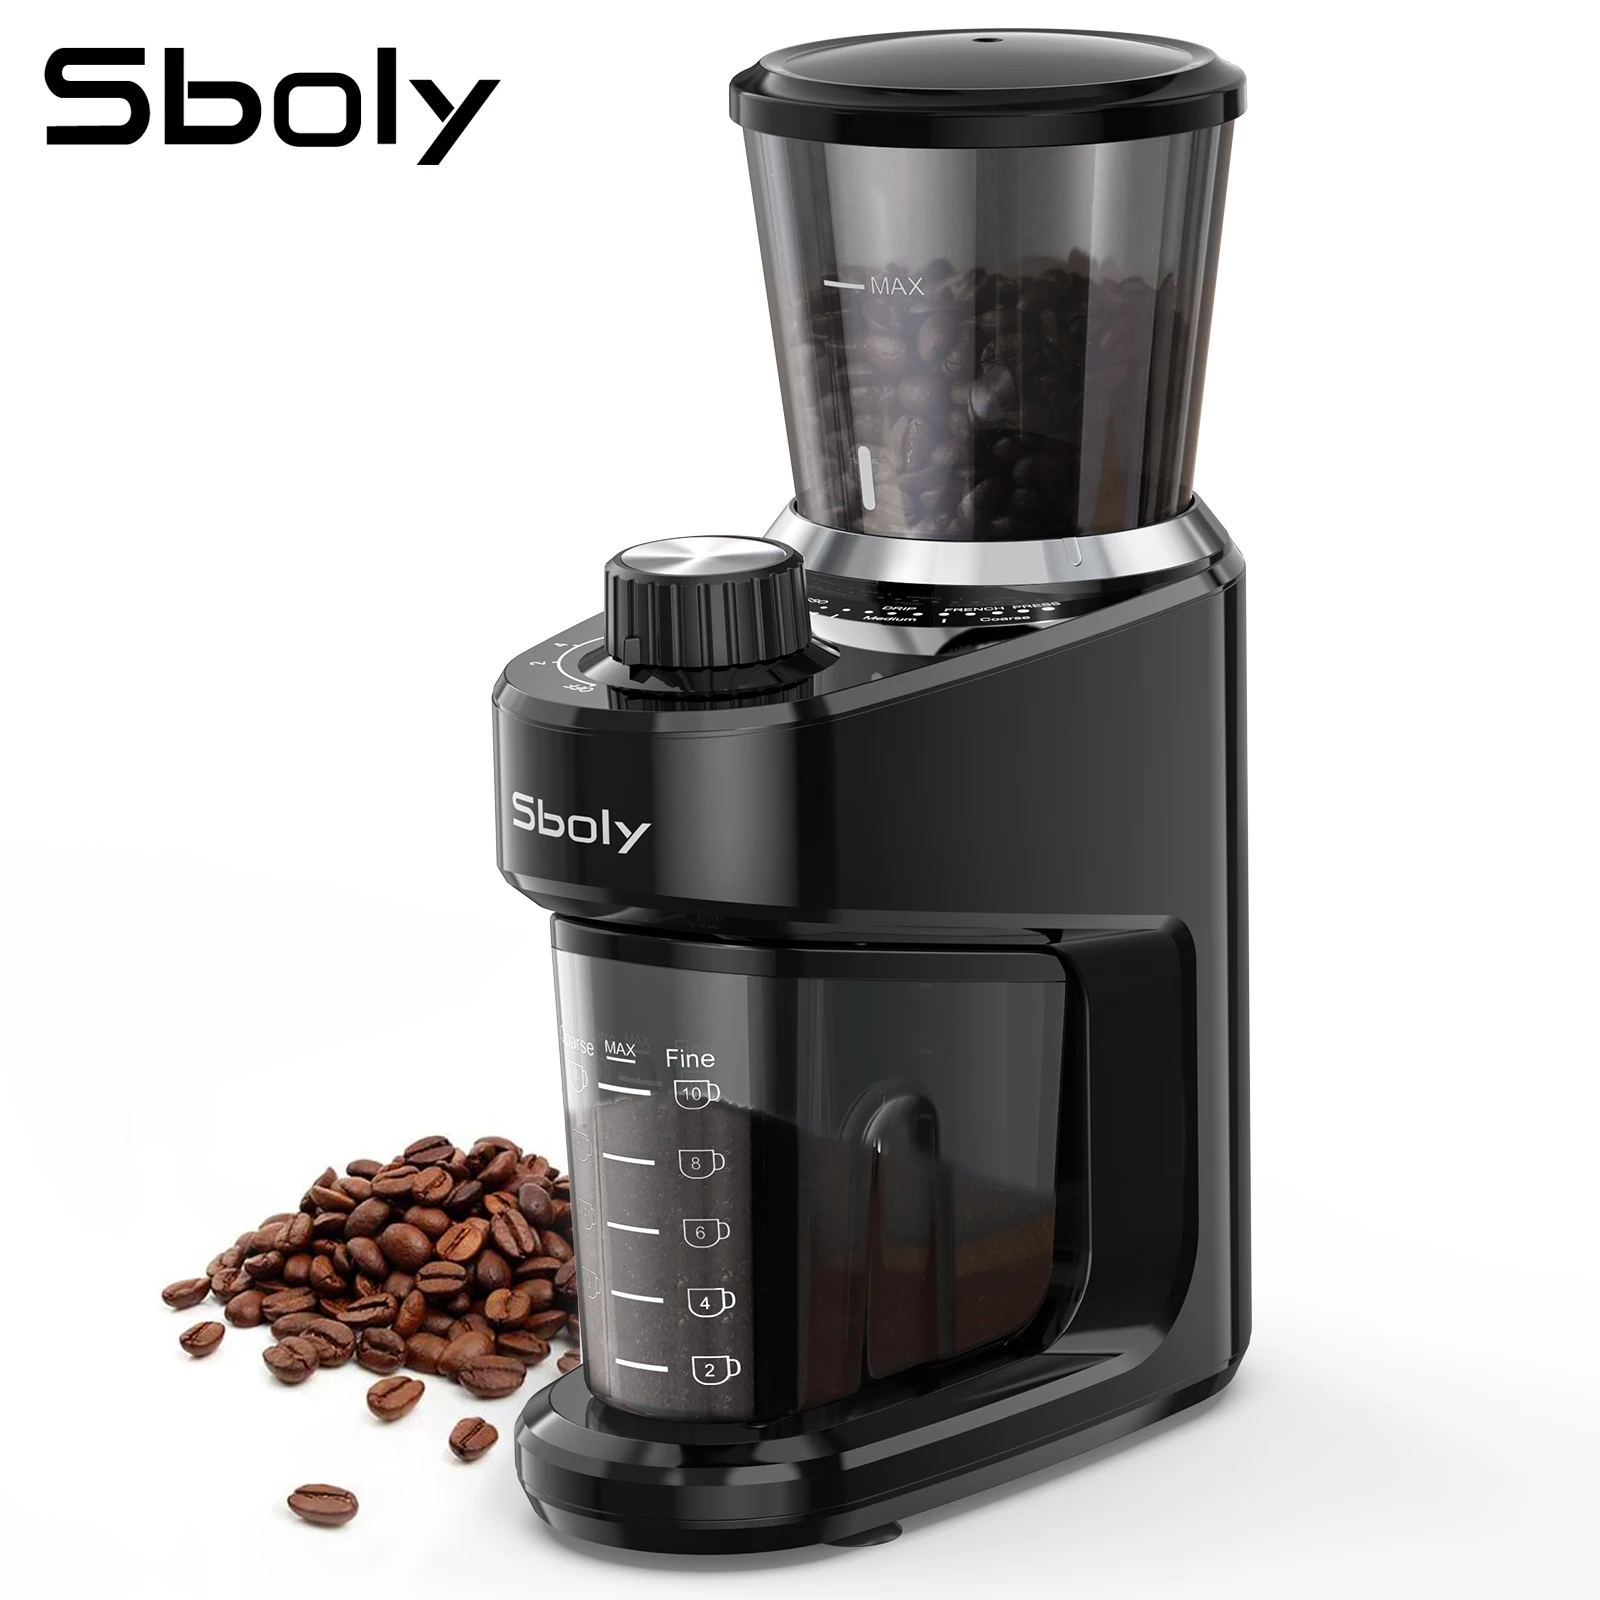 Sboly SYCG-3368 Conical Burr Professional-Grade Ceramic Grinding Core Electrical Burr 15-Setting Coffee Grinder for 2-12 Cups enlarge